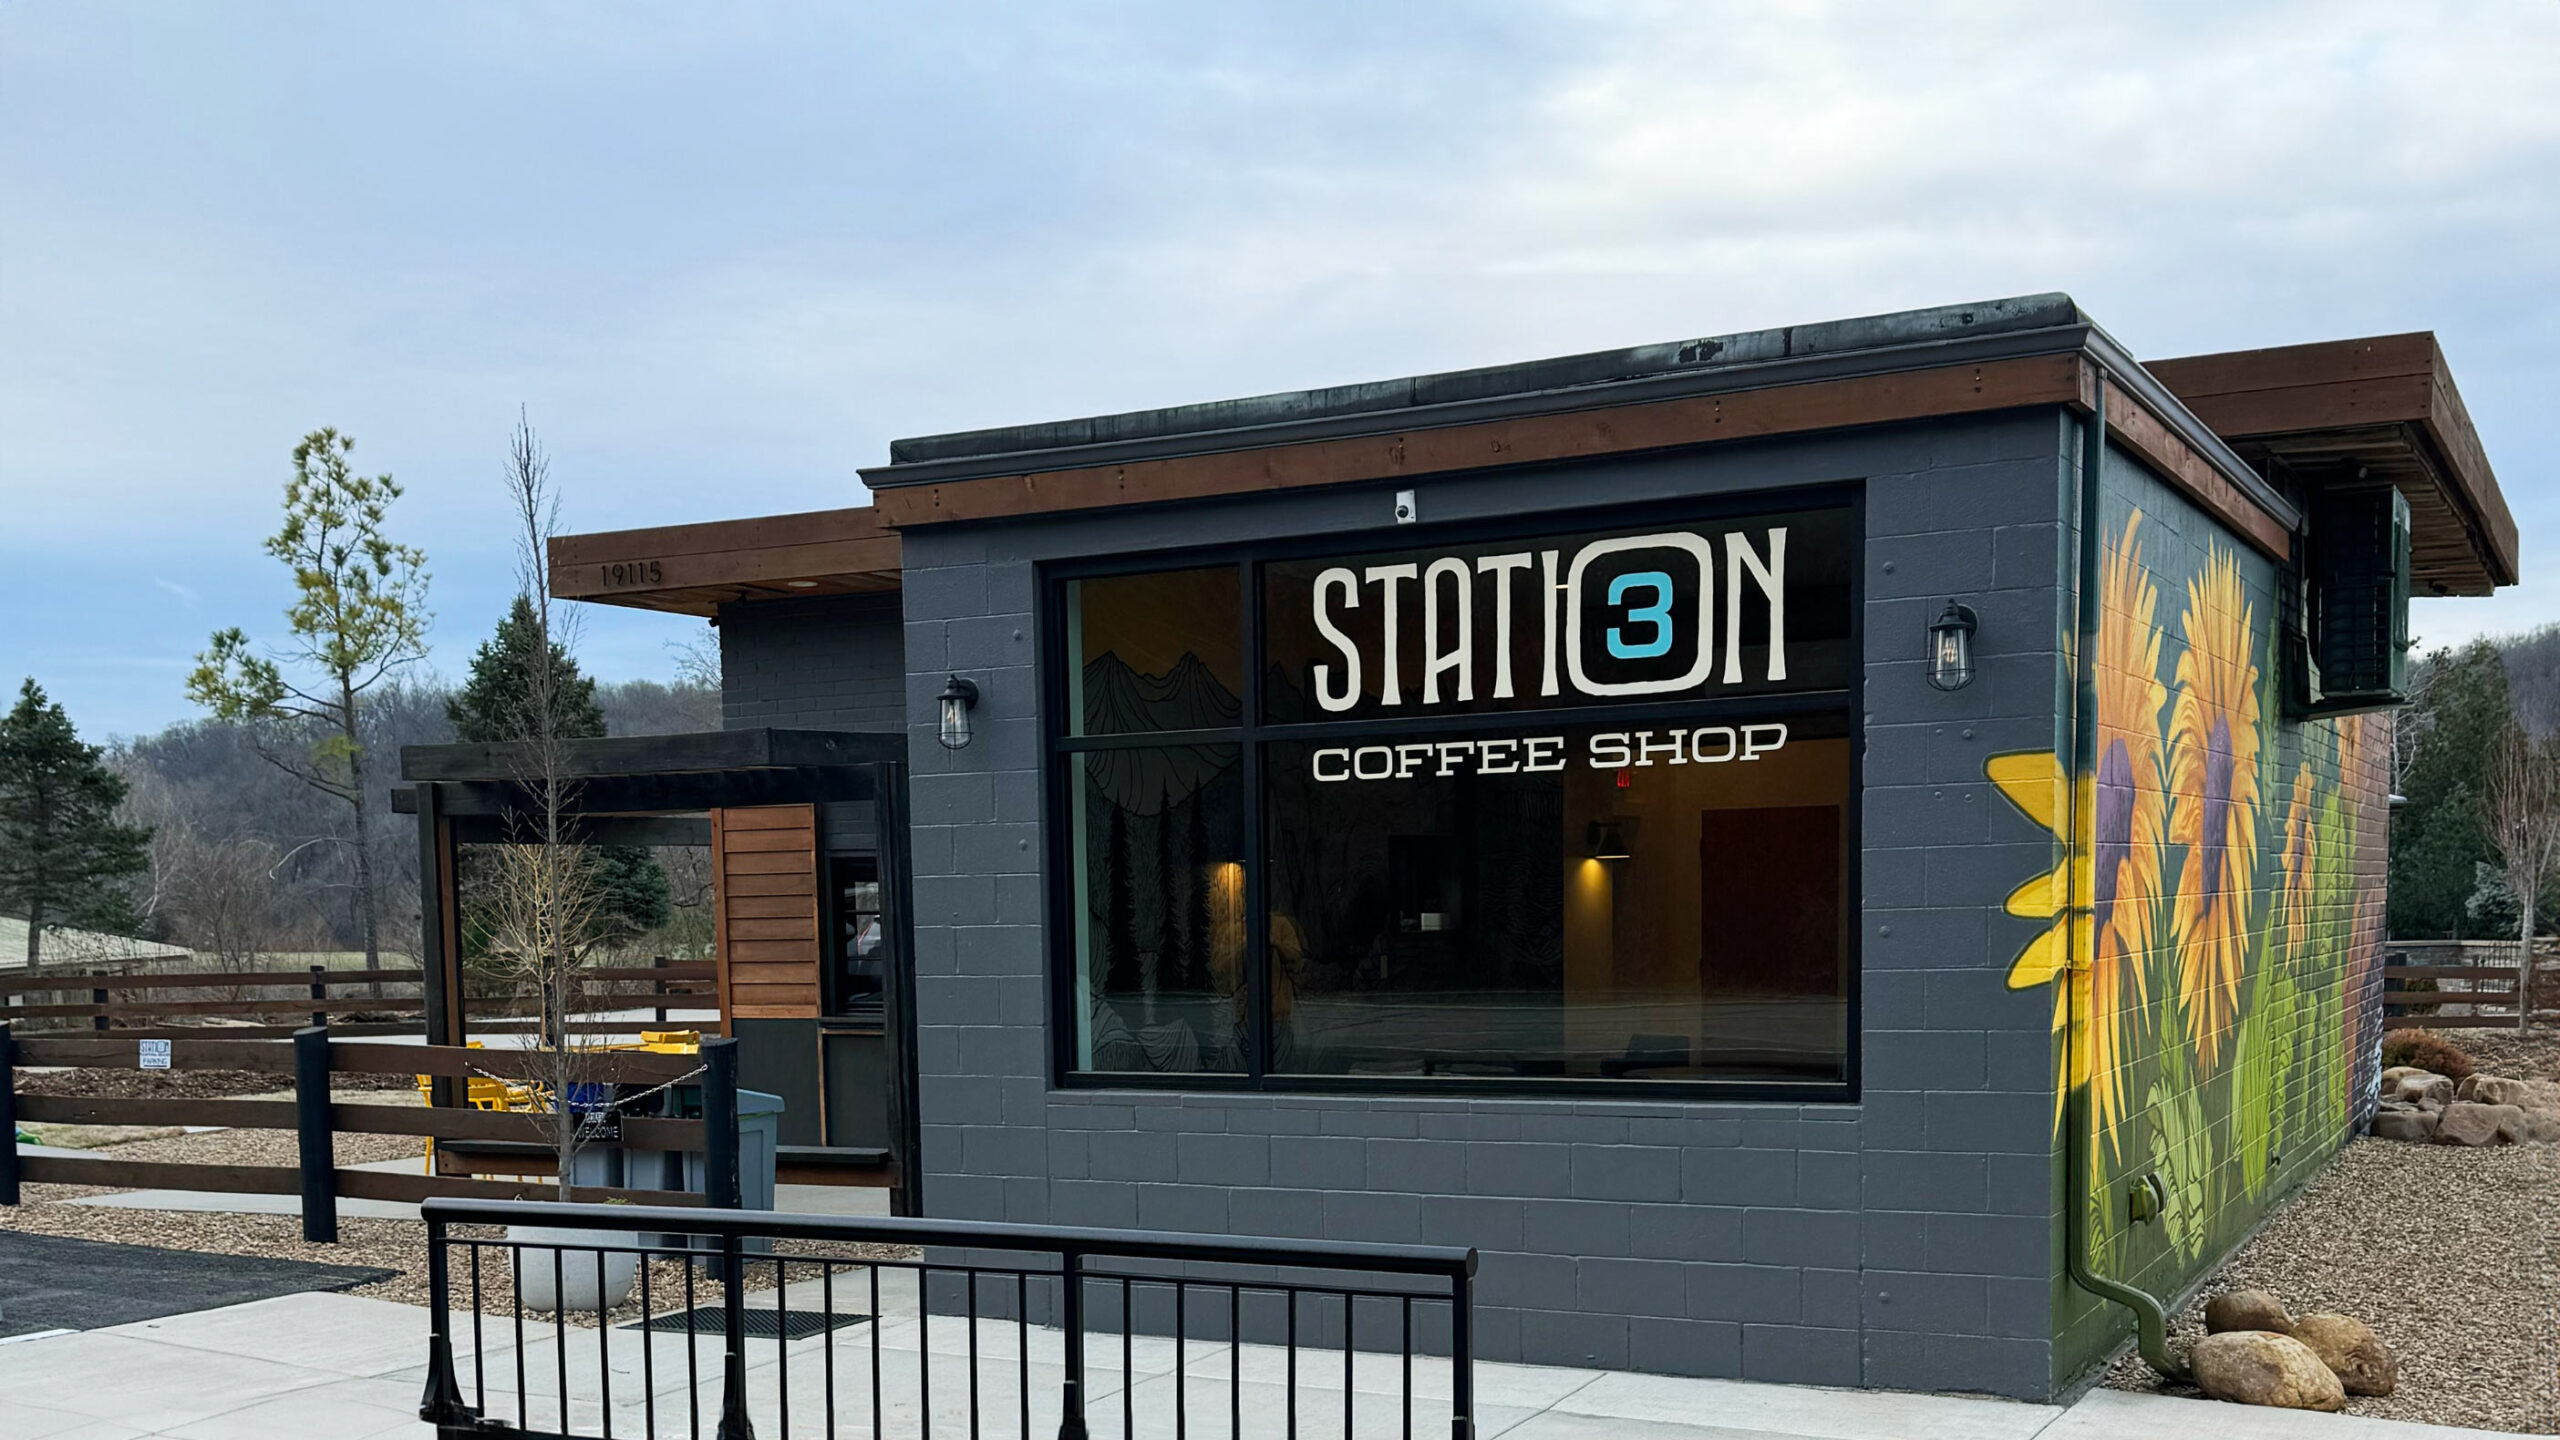 exterior shot of Station 3 Coffee Shop